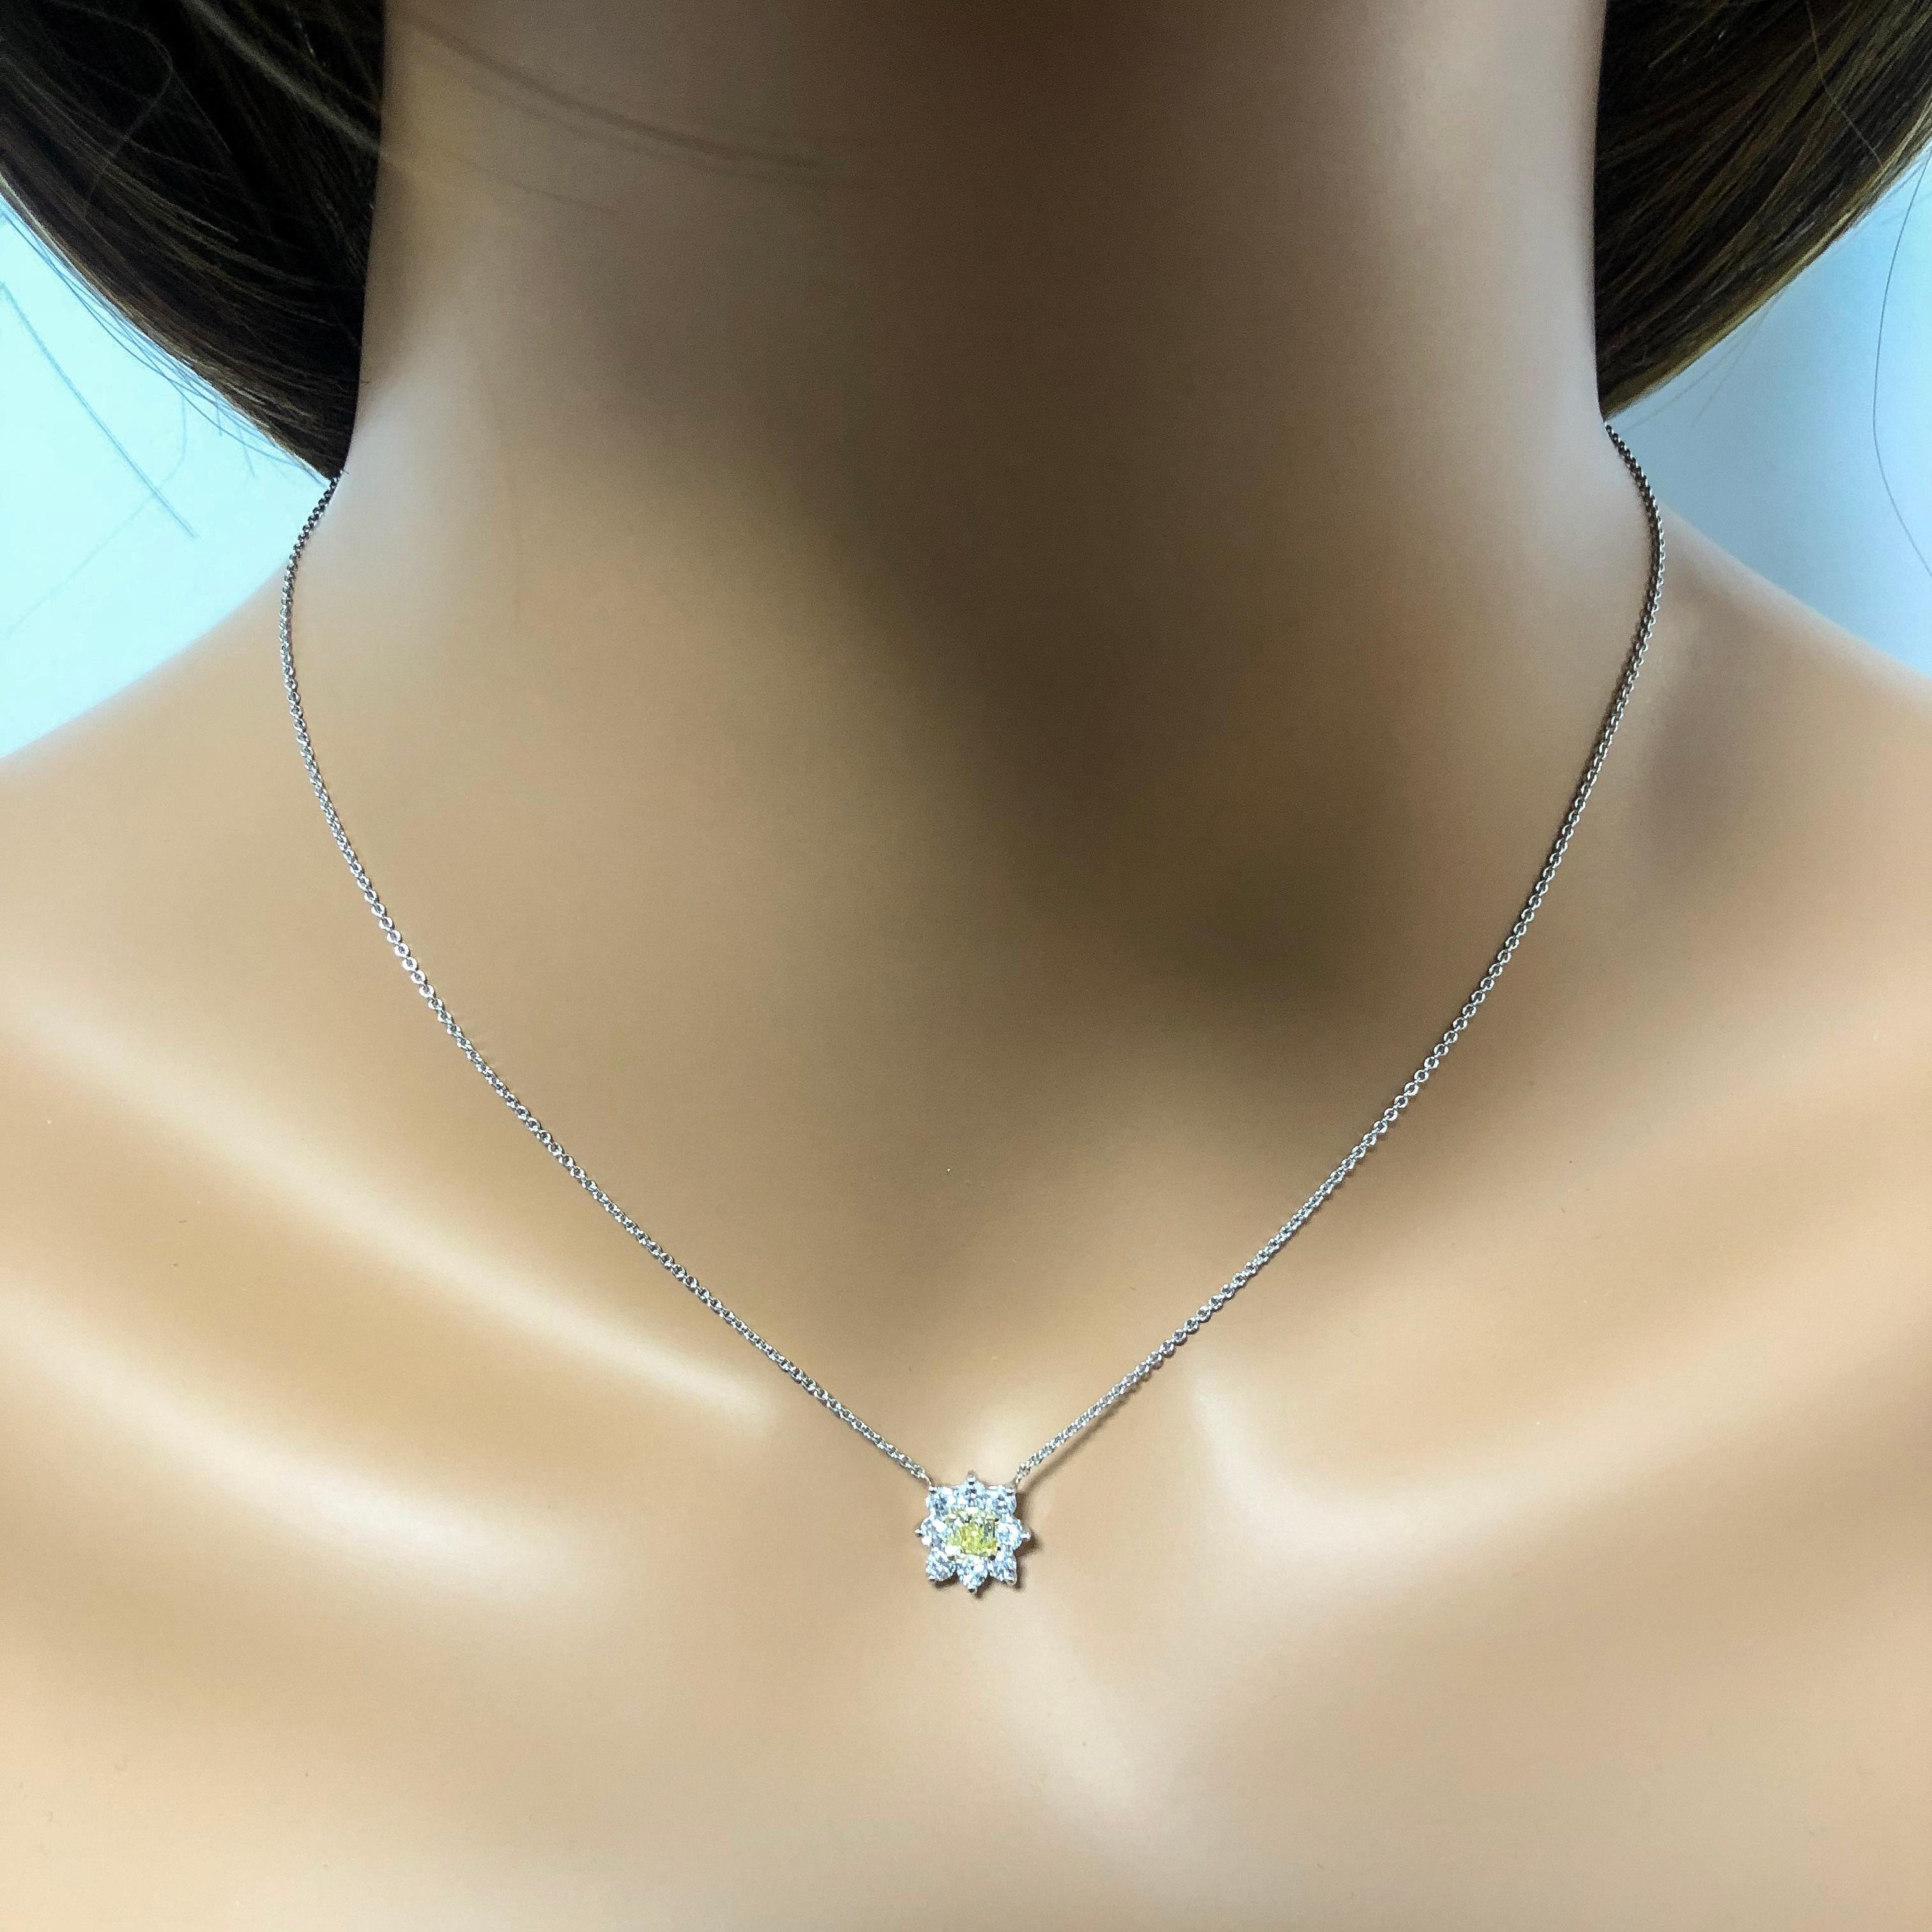 An amazing pendant necklace perfect for the summer. Features a color-rich radiant cut diamond center weighing 0.30 carats; surrounded by sparkling round diamonds weighing 0.53 carats total set in an intricate starburst design. A versatile piece